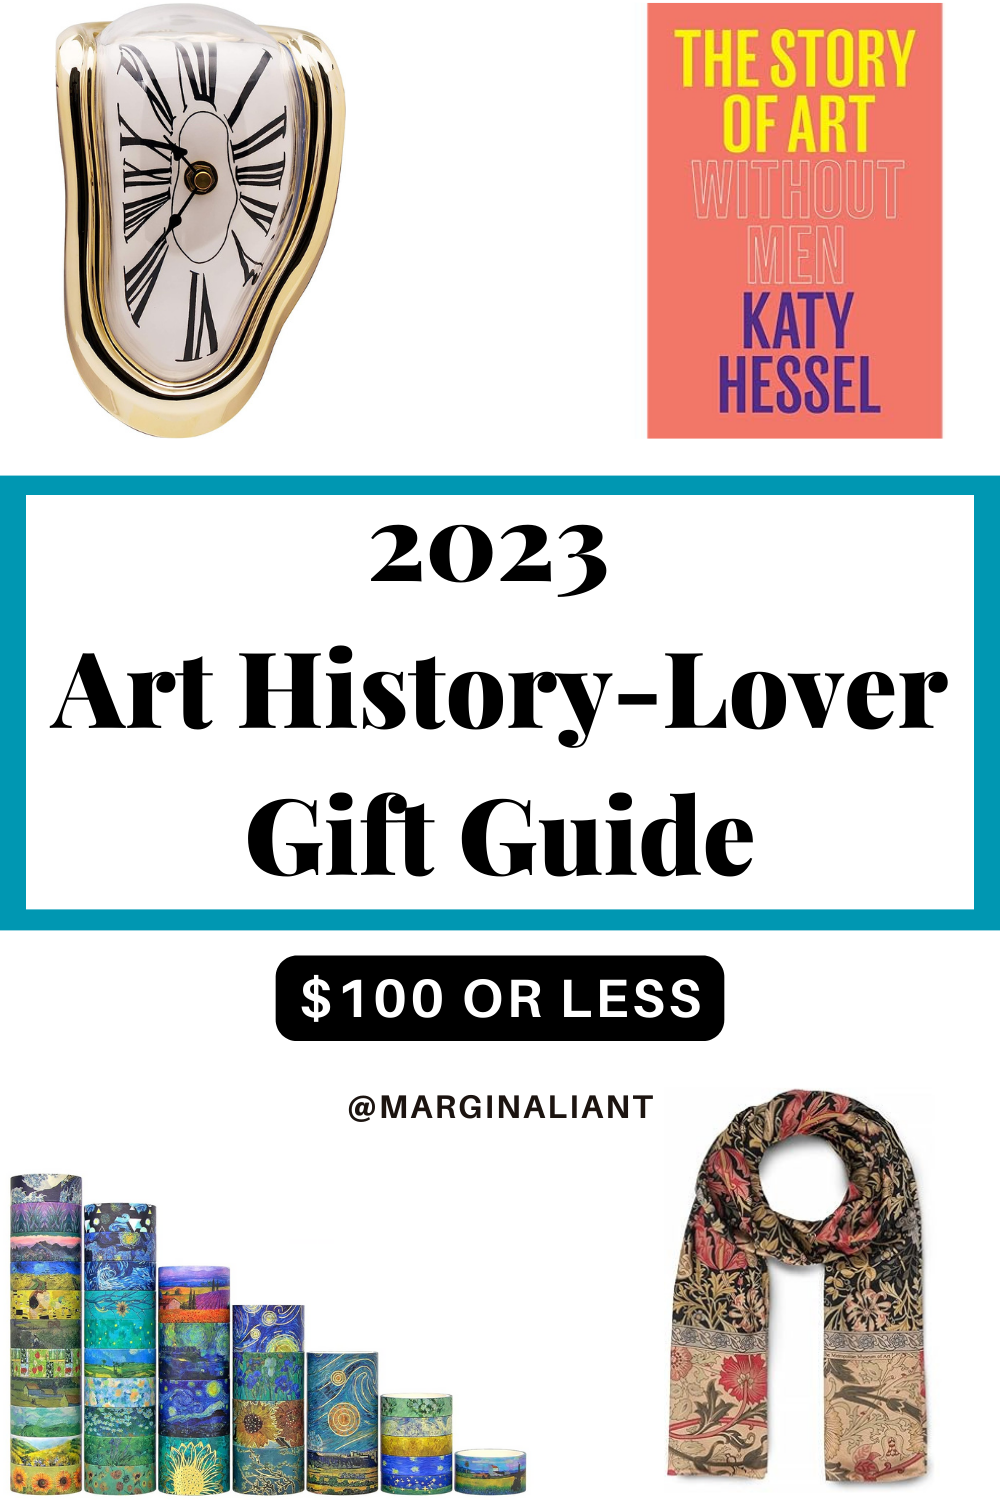 Art History-Lover Gift Guide ($100 or Less), by Mary Rose, Nov, 2023